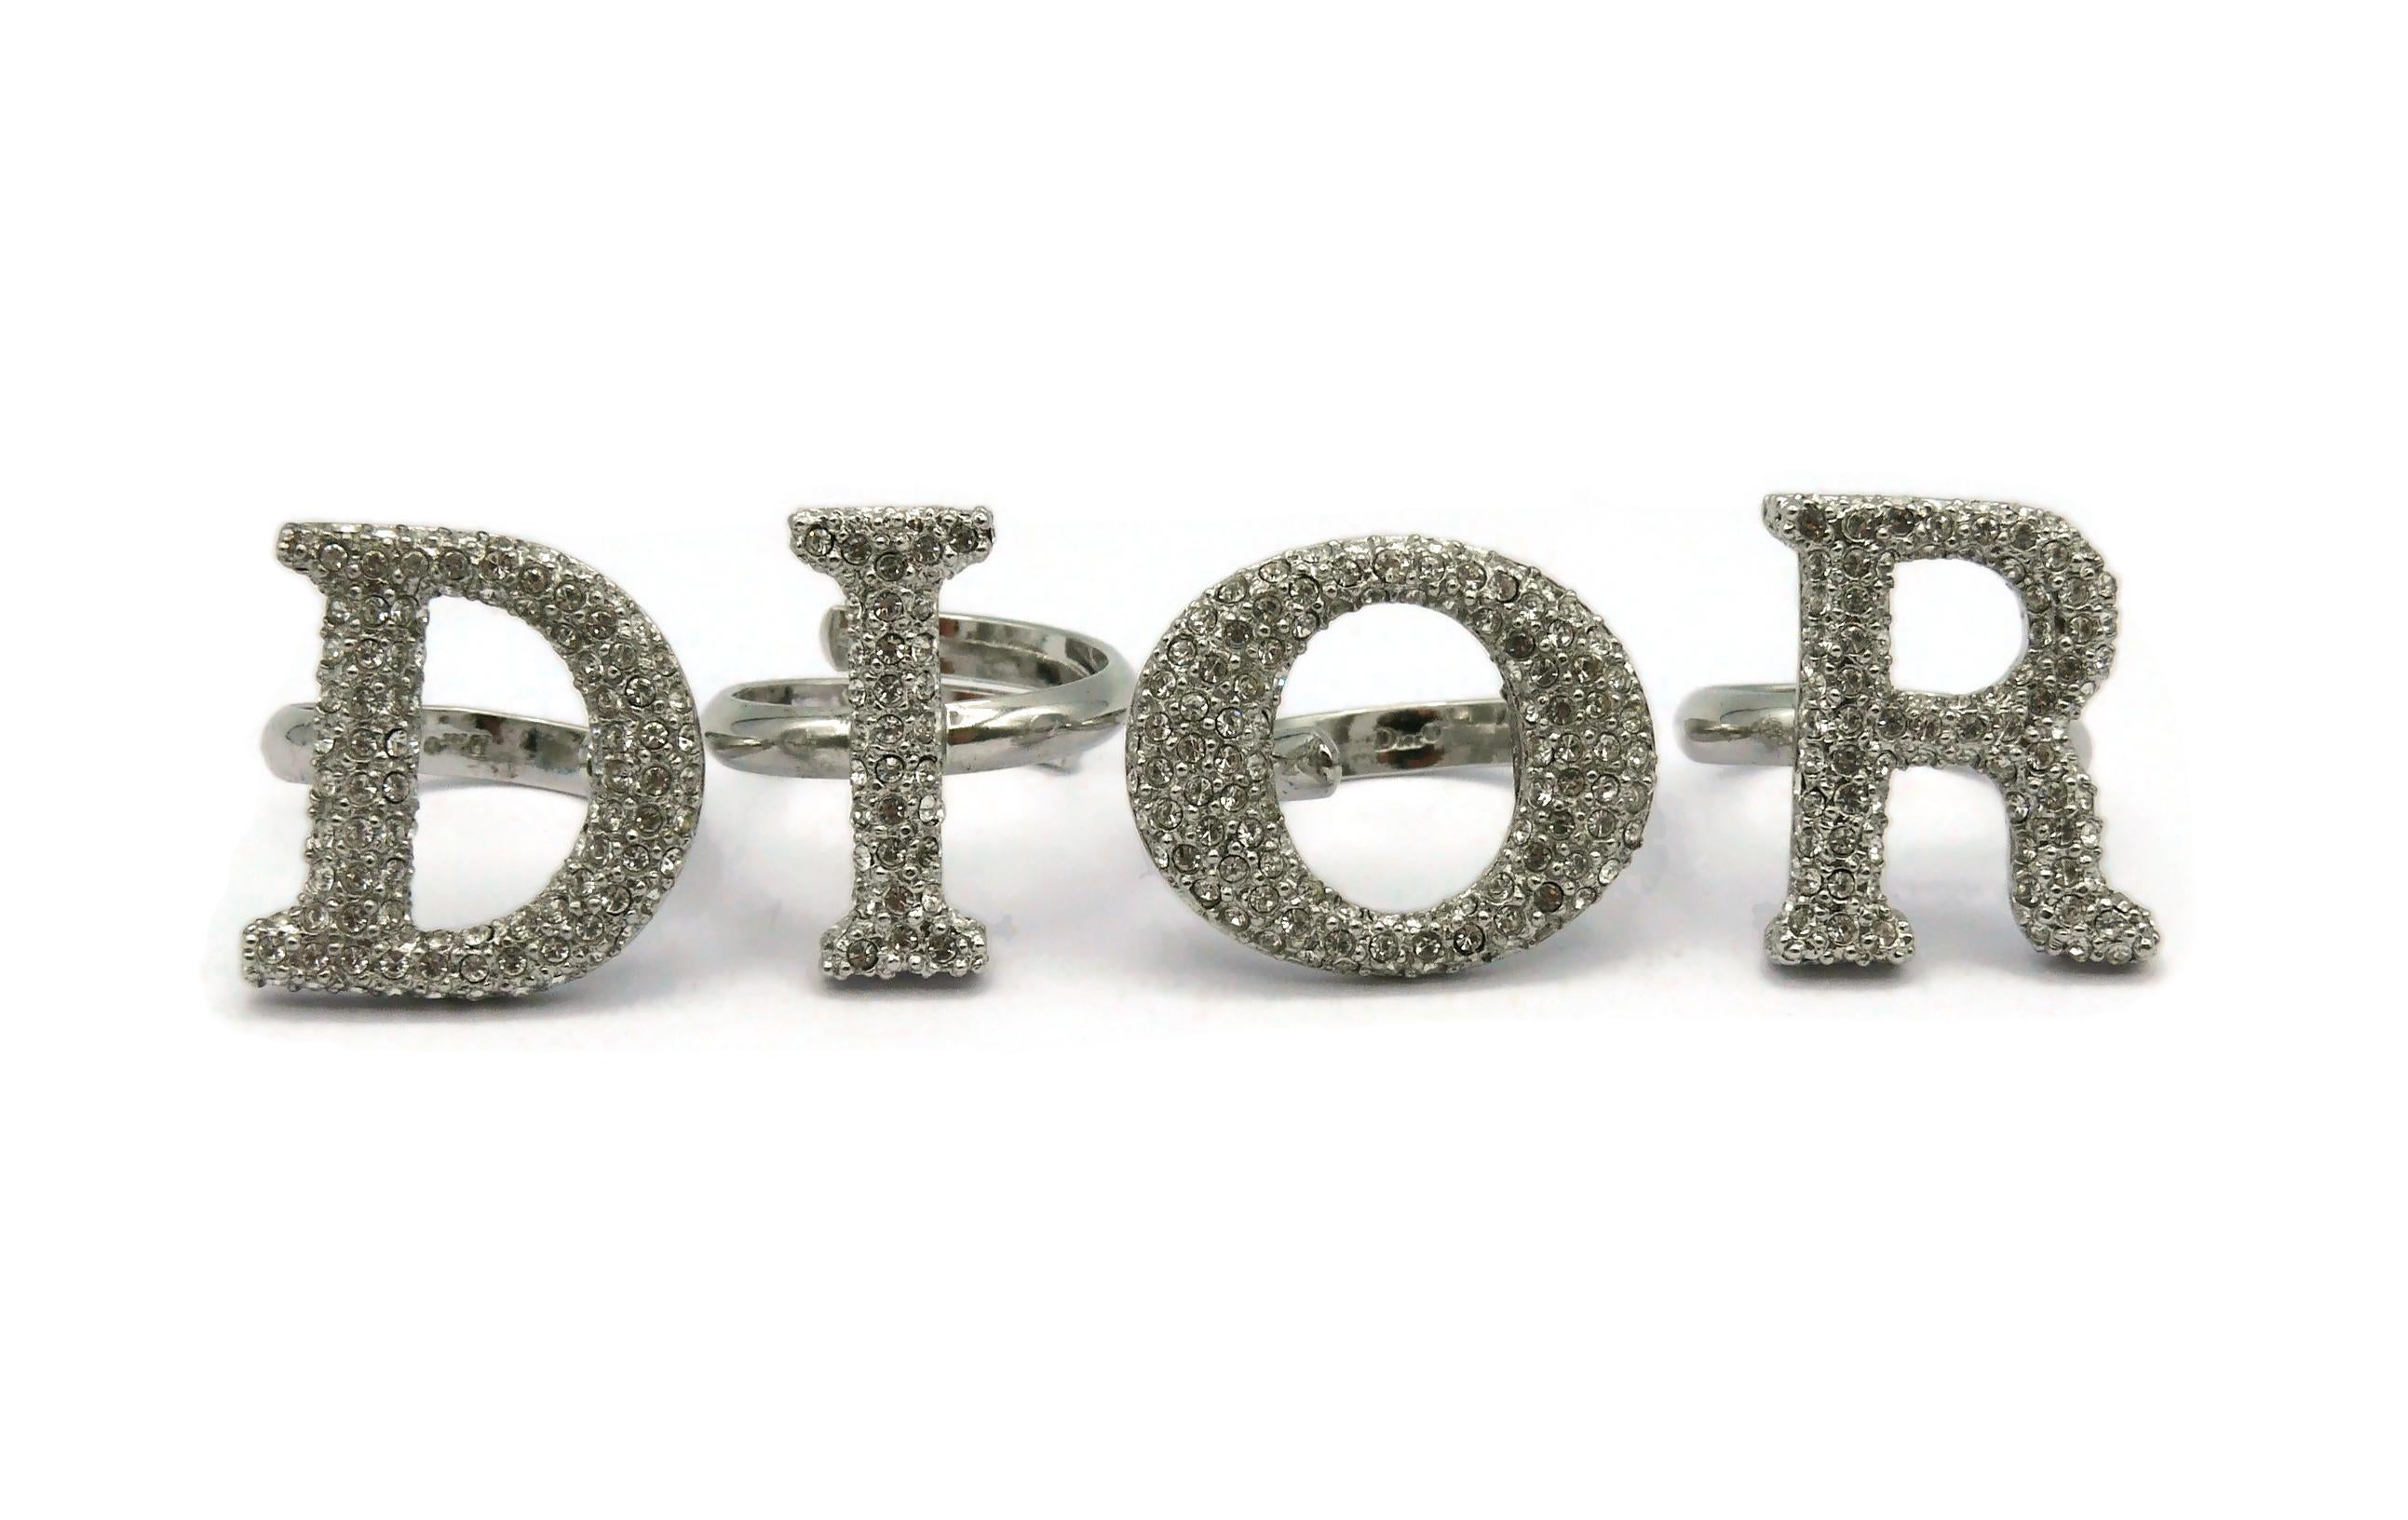 CHRISTIAN DIOR by JOHN GALLIANO vintage iconic silver tone D I O R letters ring set embellished with clear crystals.

Adjustable.

All letters (except the I) are embossed DIOR.
Provenance : French private DIOR collection.

As worn by SARAH JESSICA